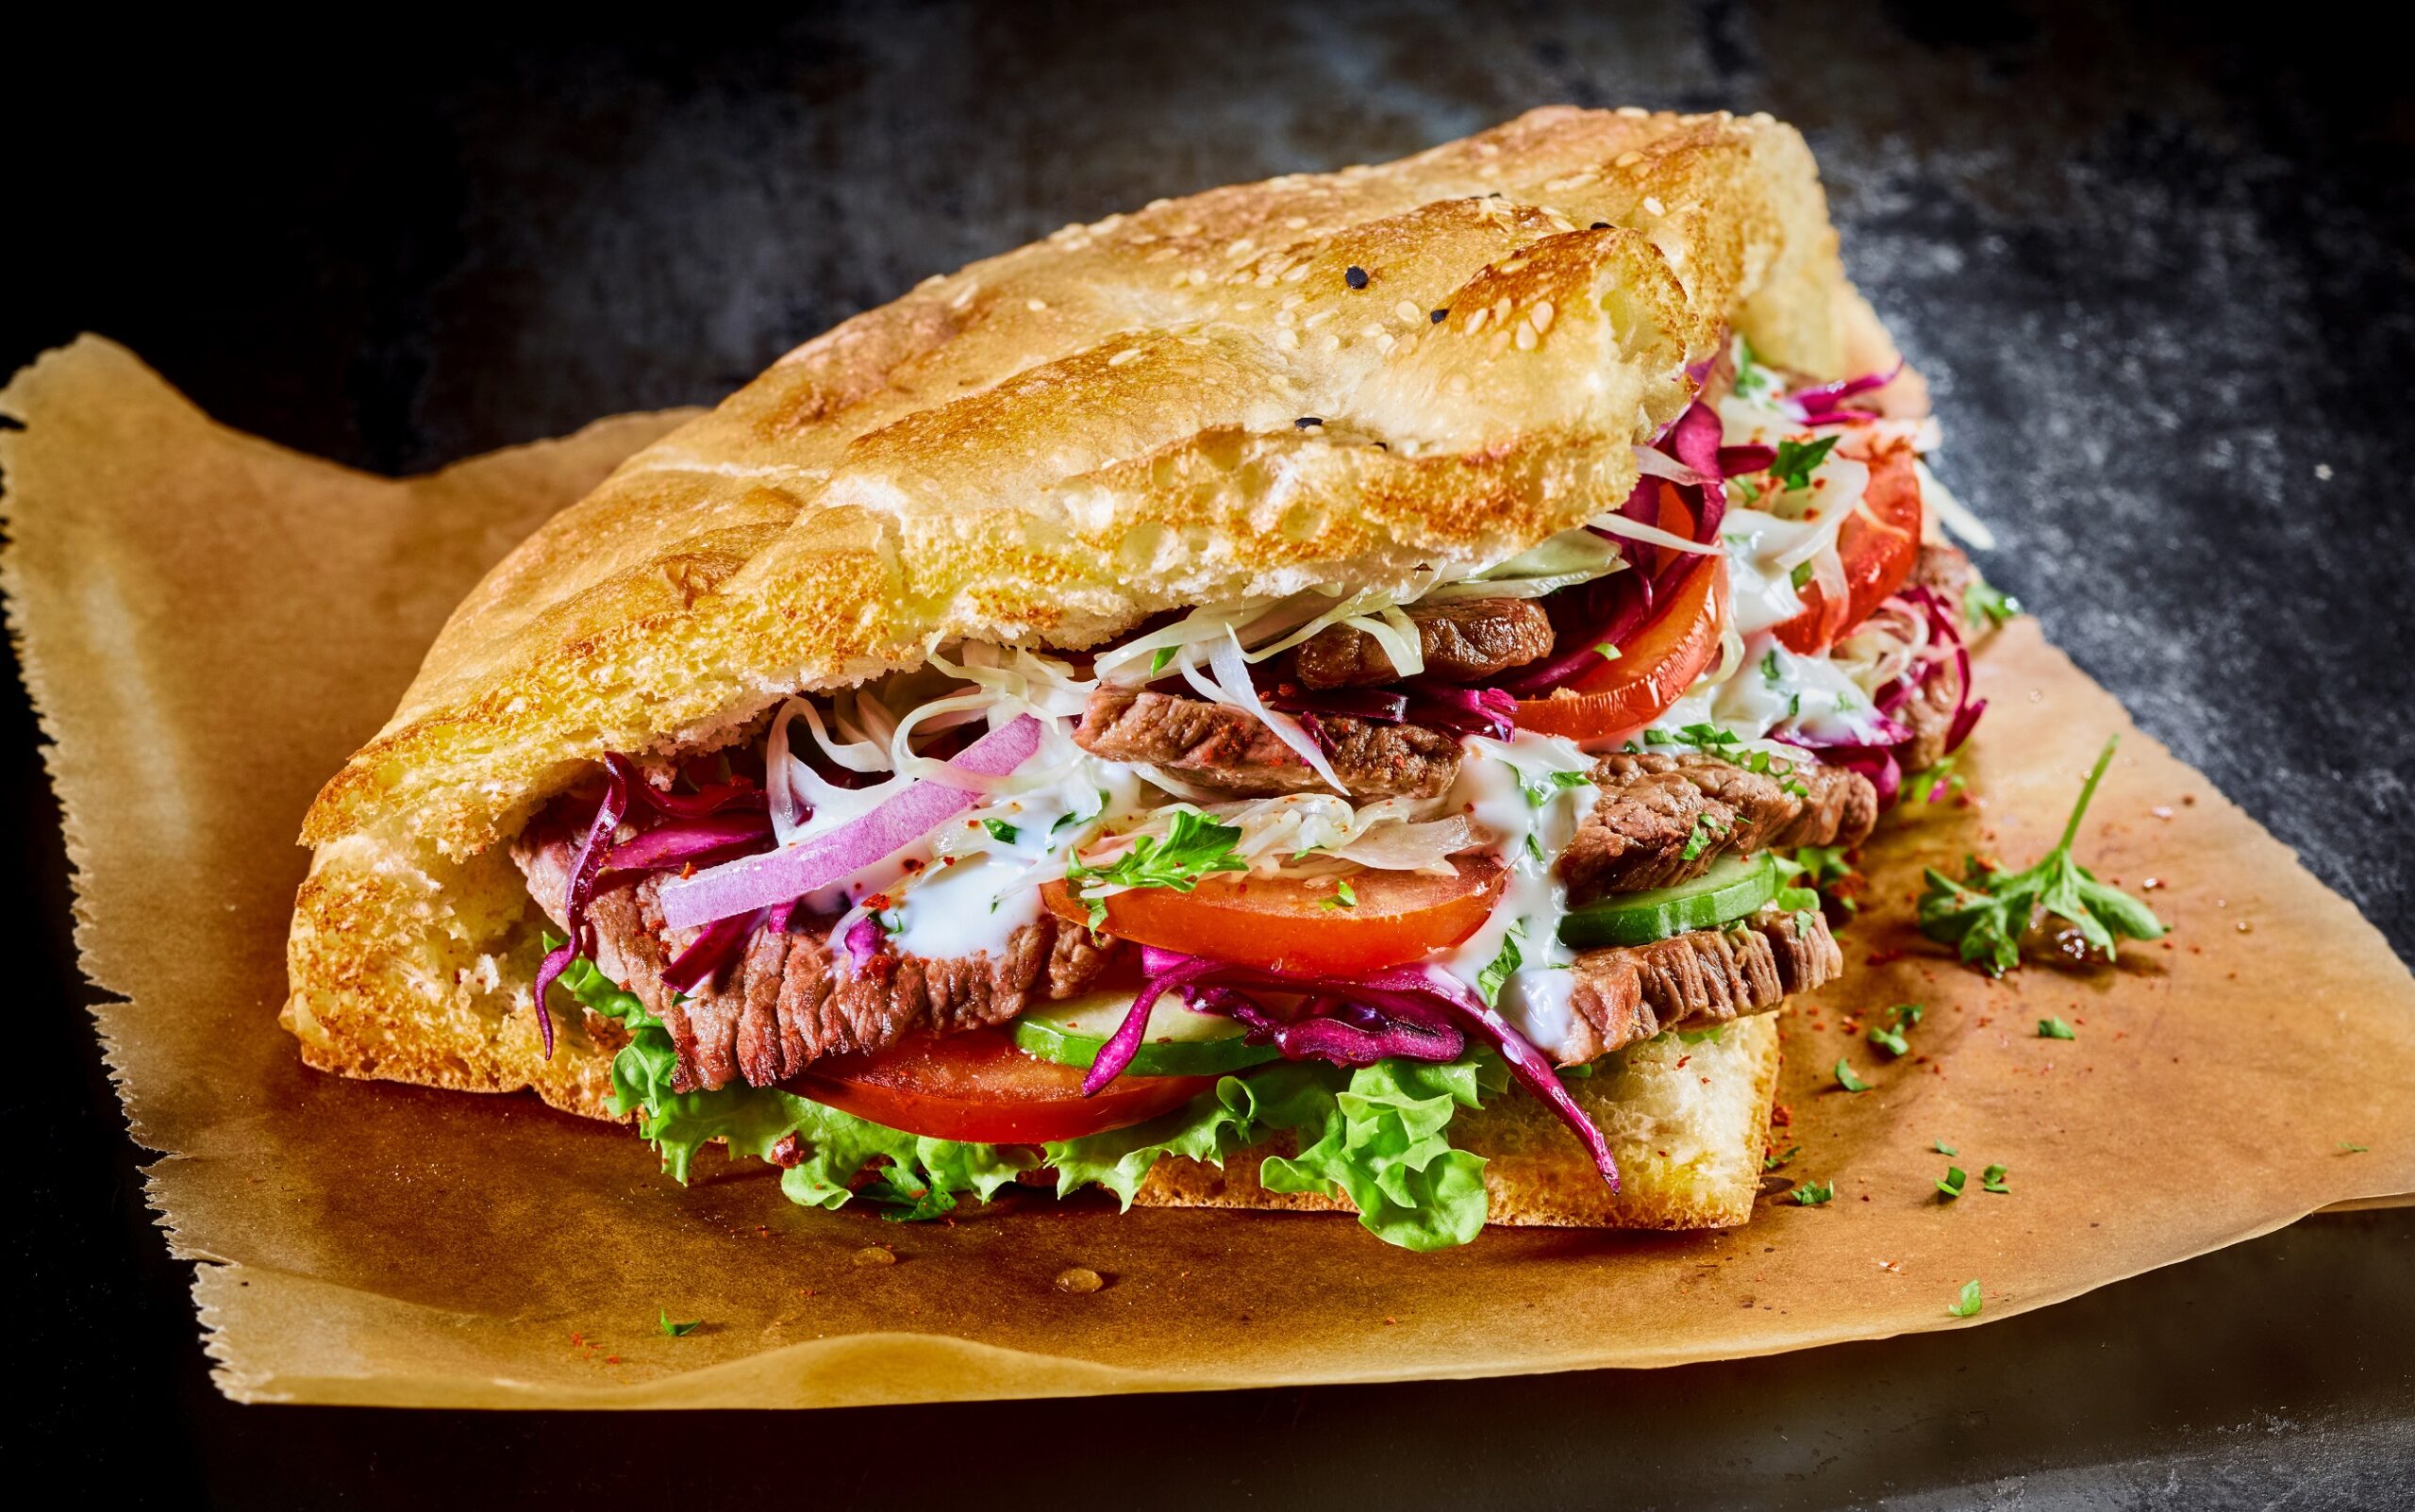 Doner meat contaminated with Salmonella: Several outbreaks and one death